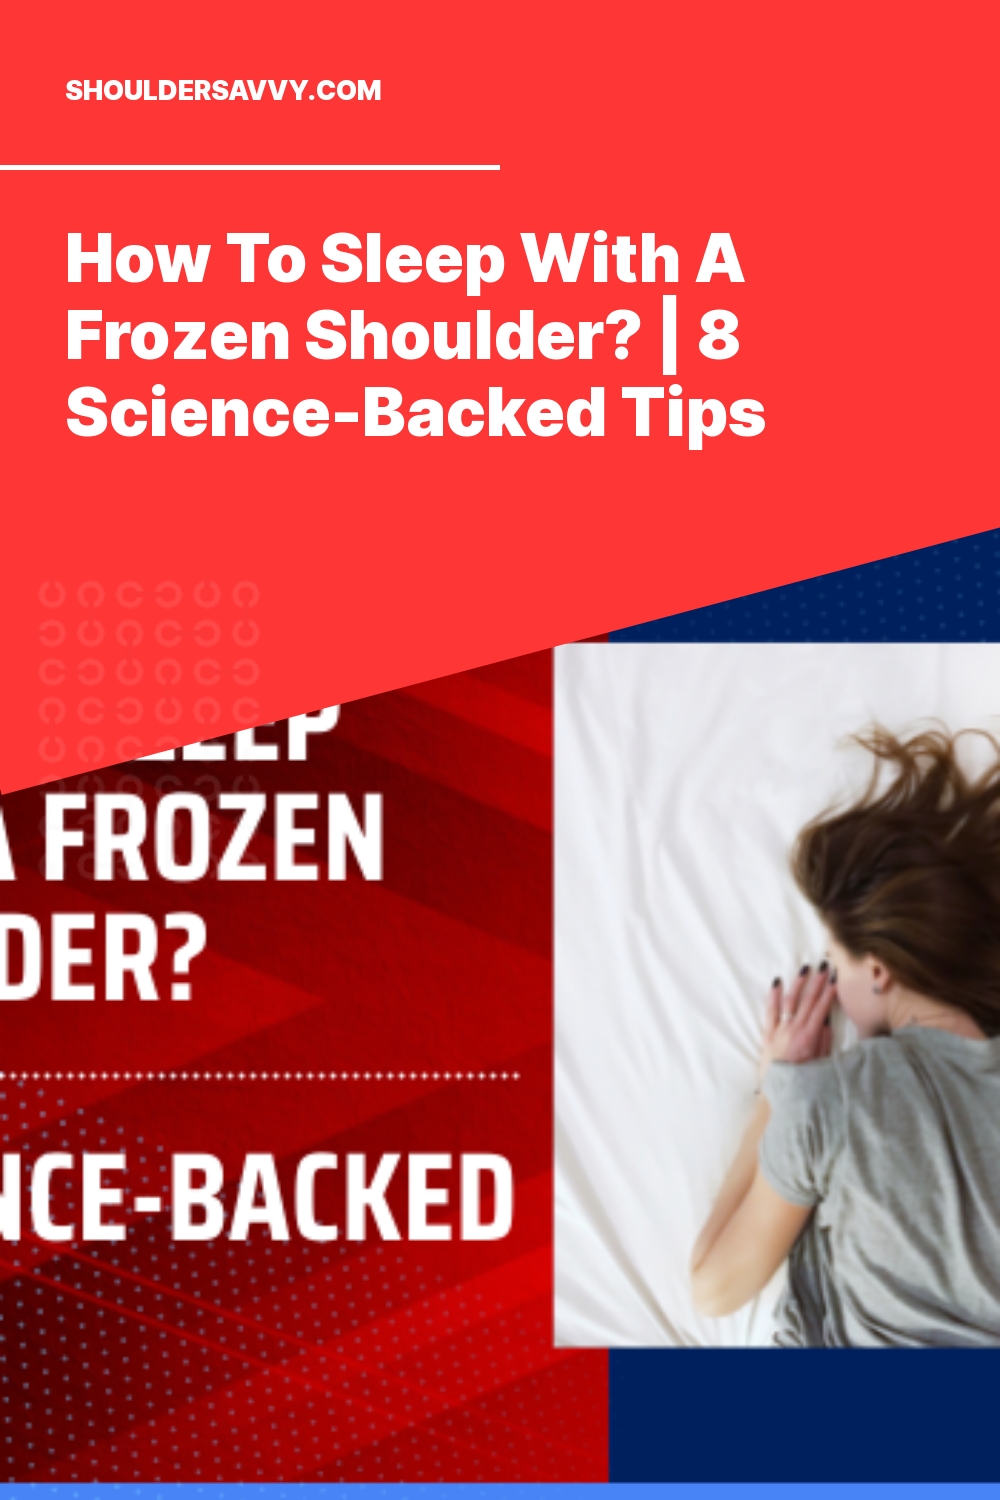 How To Sleep With A Frozen Shoulder? | 8 Science-Backed Tips